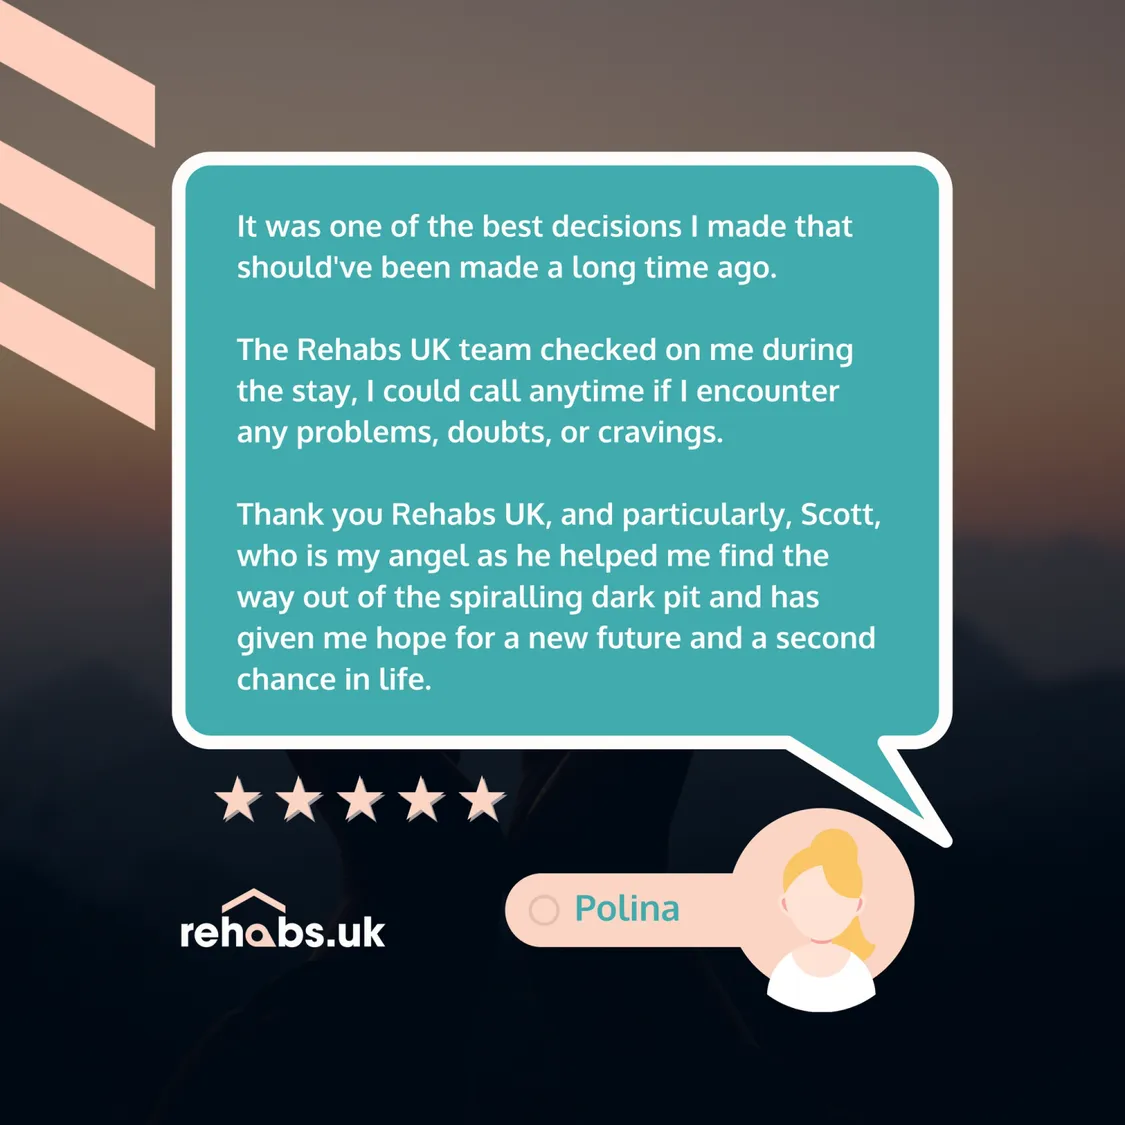 5 Star Google Review: It was one of the best decisions I made that should've been made a long time ago.   The Rehabs UK team checked on me during the stay, I could call anytime if I encounter any problems, doubts, or cravings.   Thank you Rehabs UK, and particularly, Scott, who is my angel as he helped me find the way out of the spiralling dark pit and has given me hope for a new future and a second chance in life.